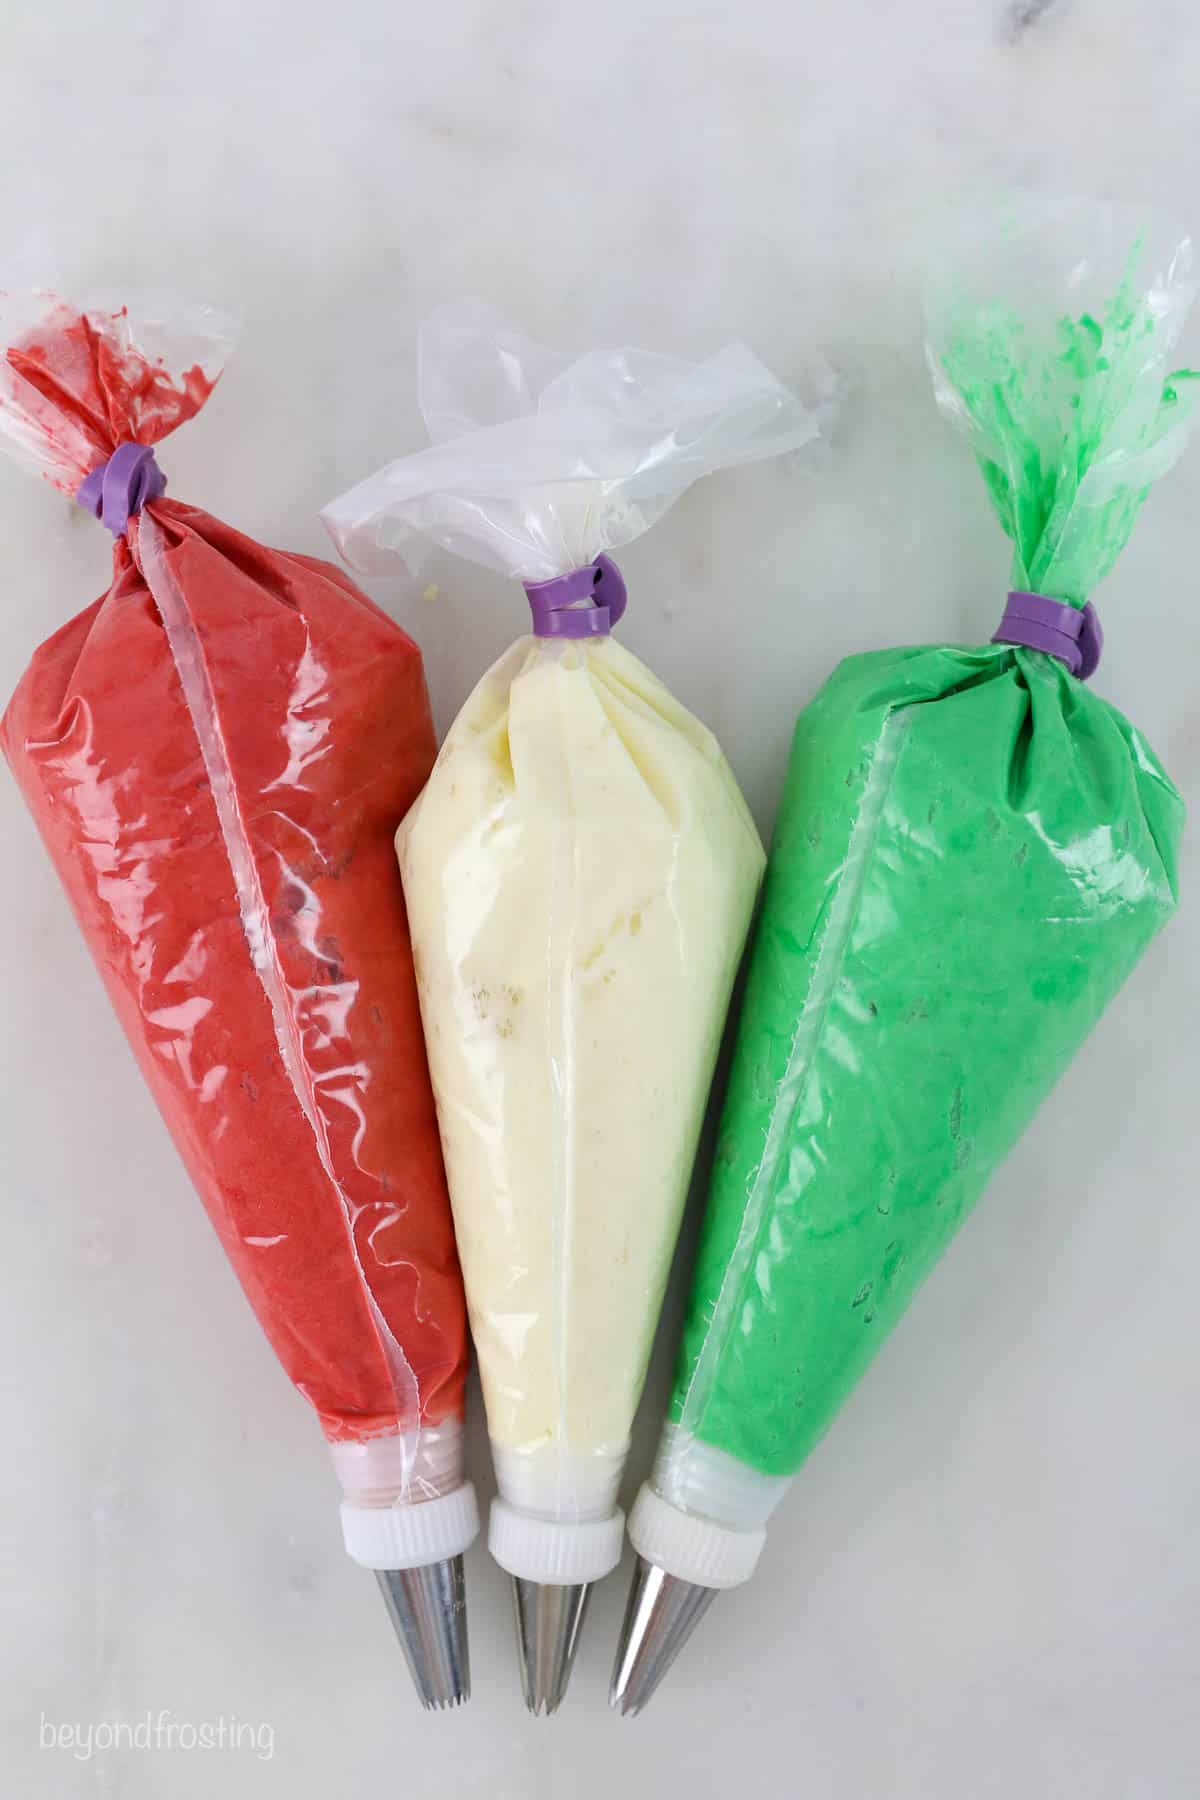 Three piping bags with buttercream frosting